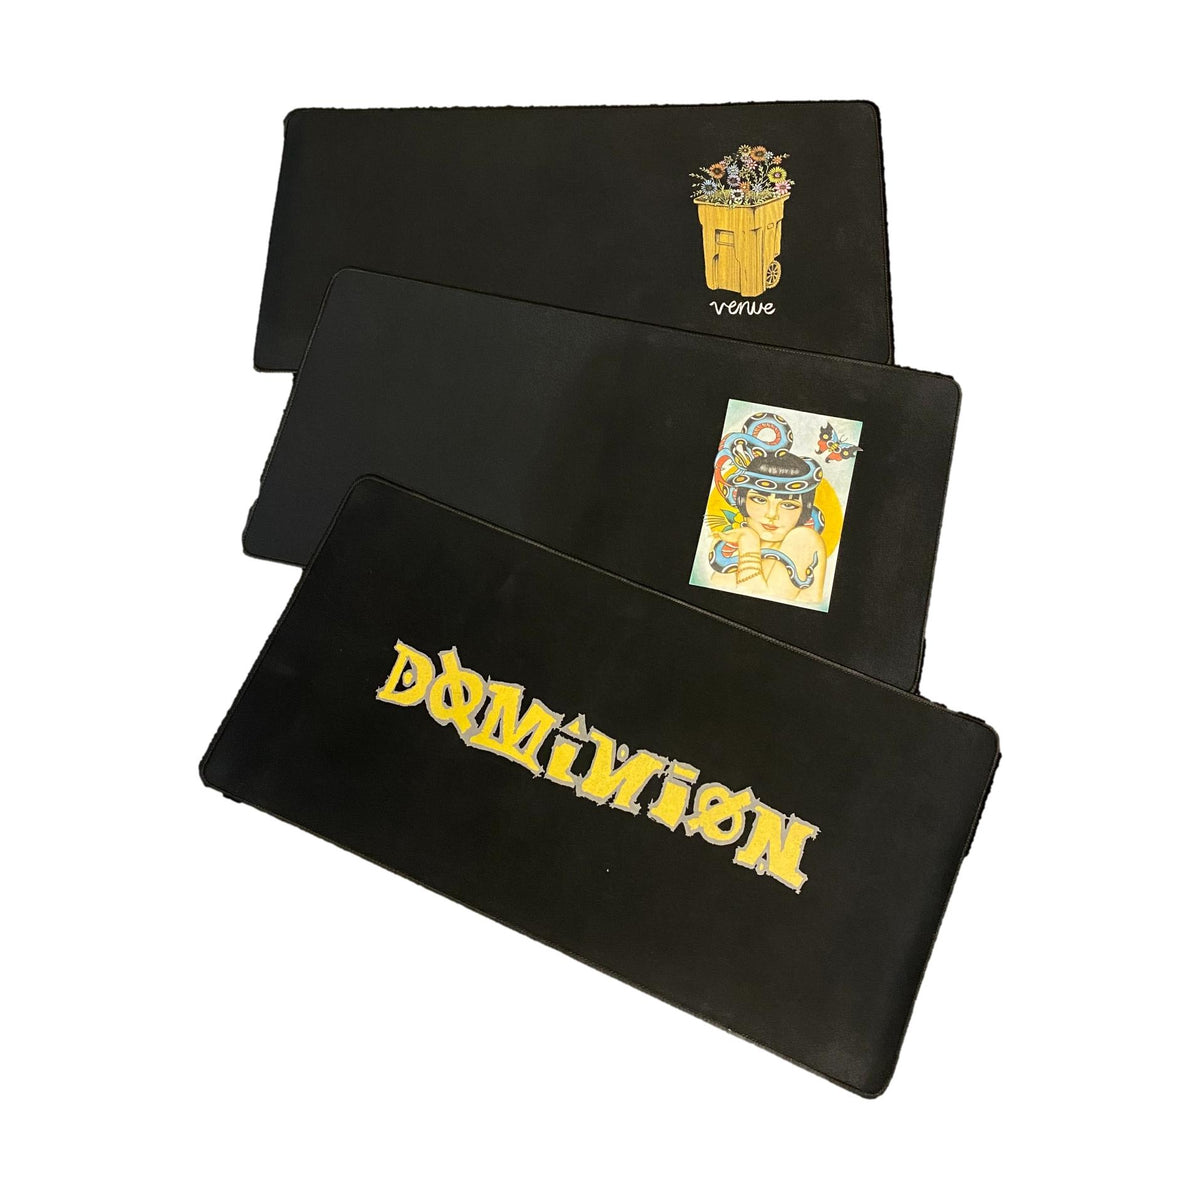 Venue Dominion Scratchy Logo Gaming Mouse Pad